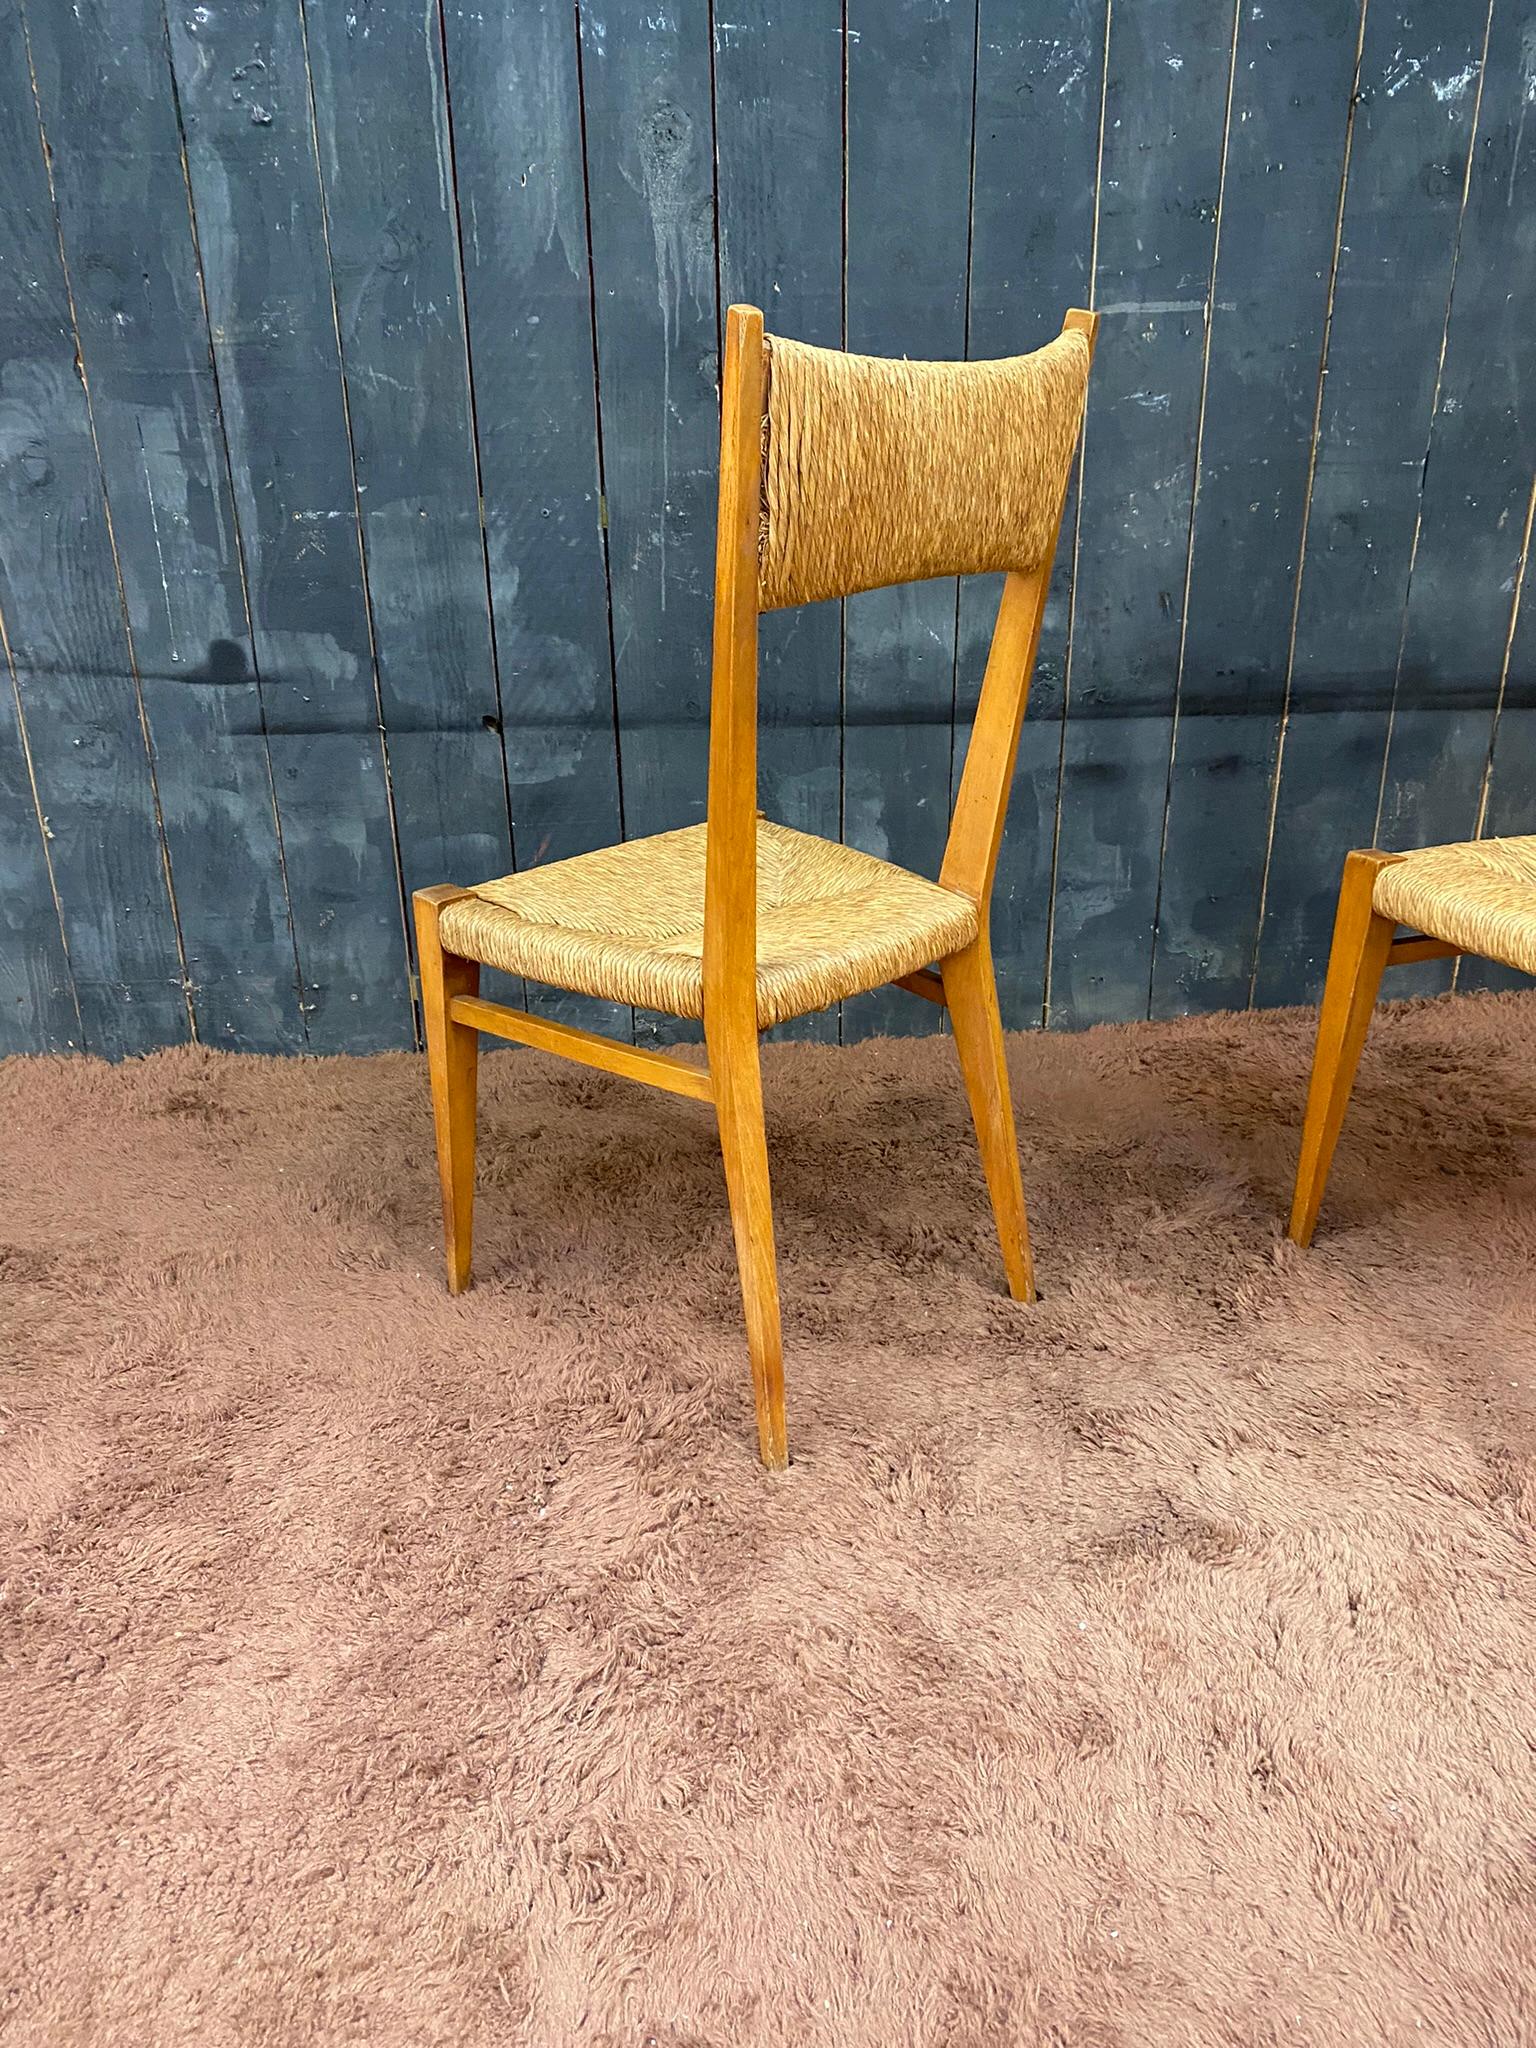 Series of 6 Elegant Oak Chairs, French Reconstruction Period, circa 1950 For Sale 10